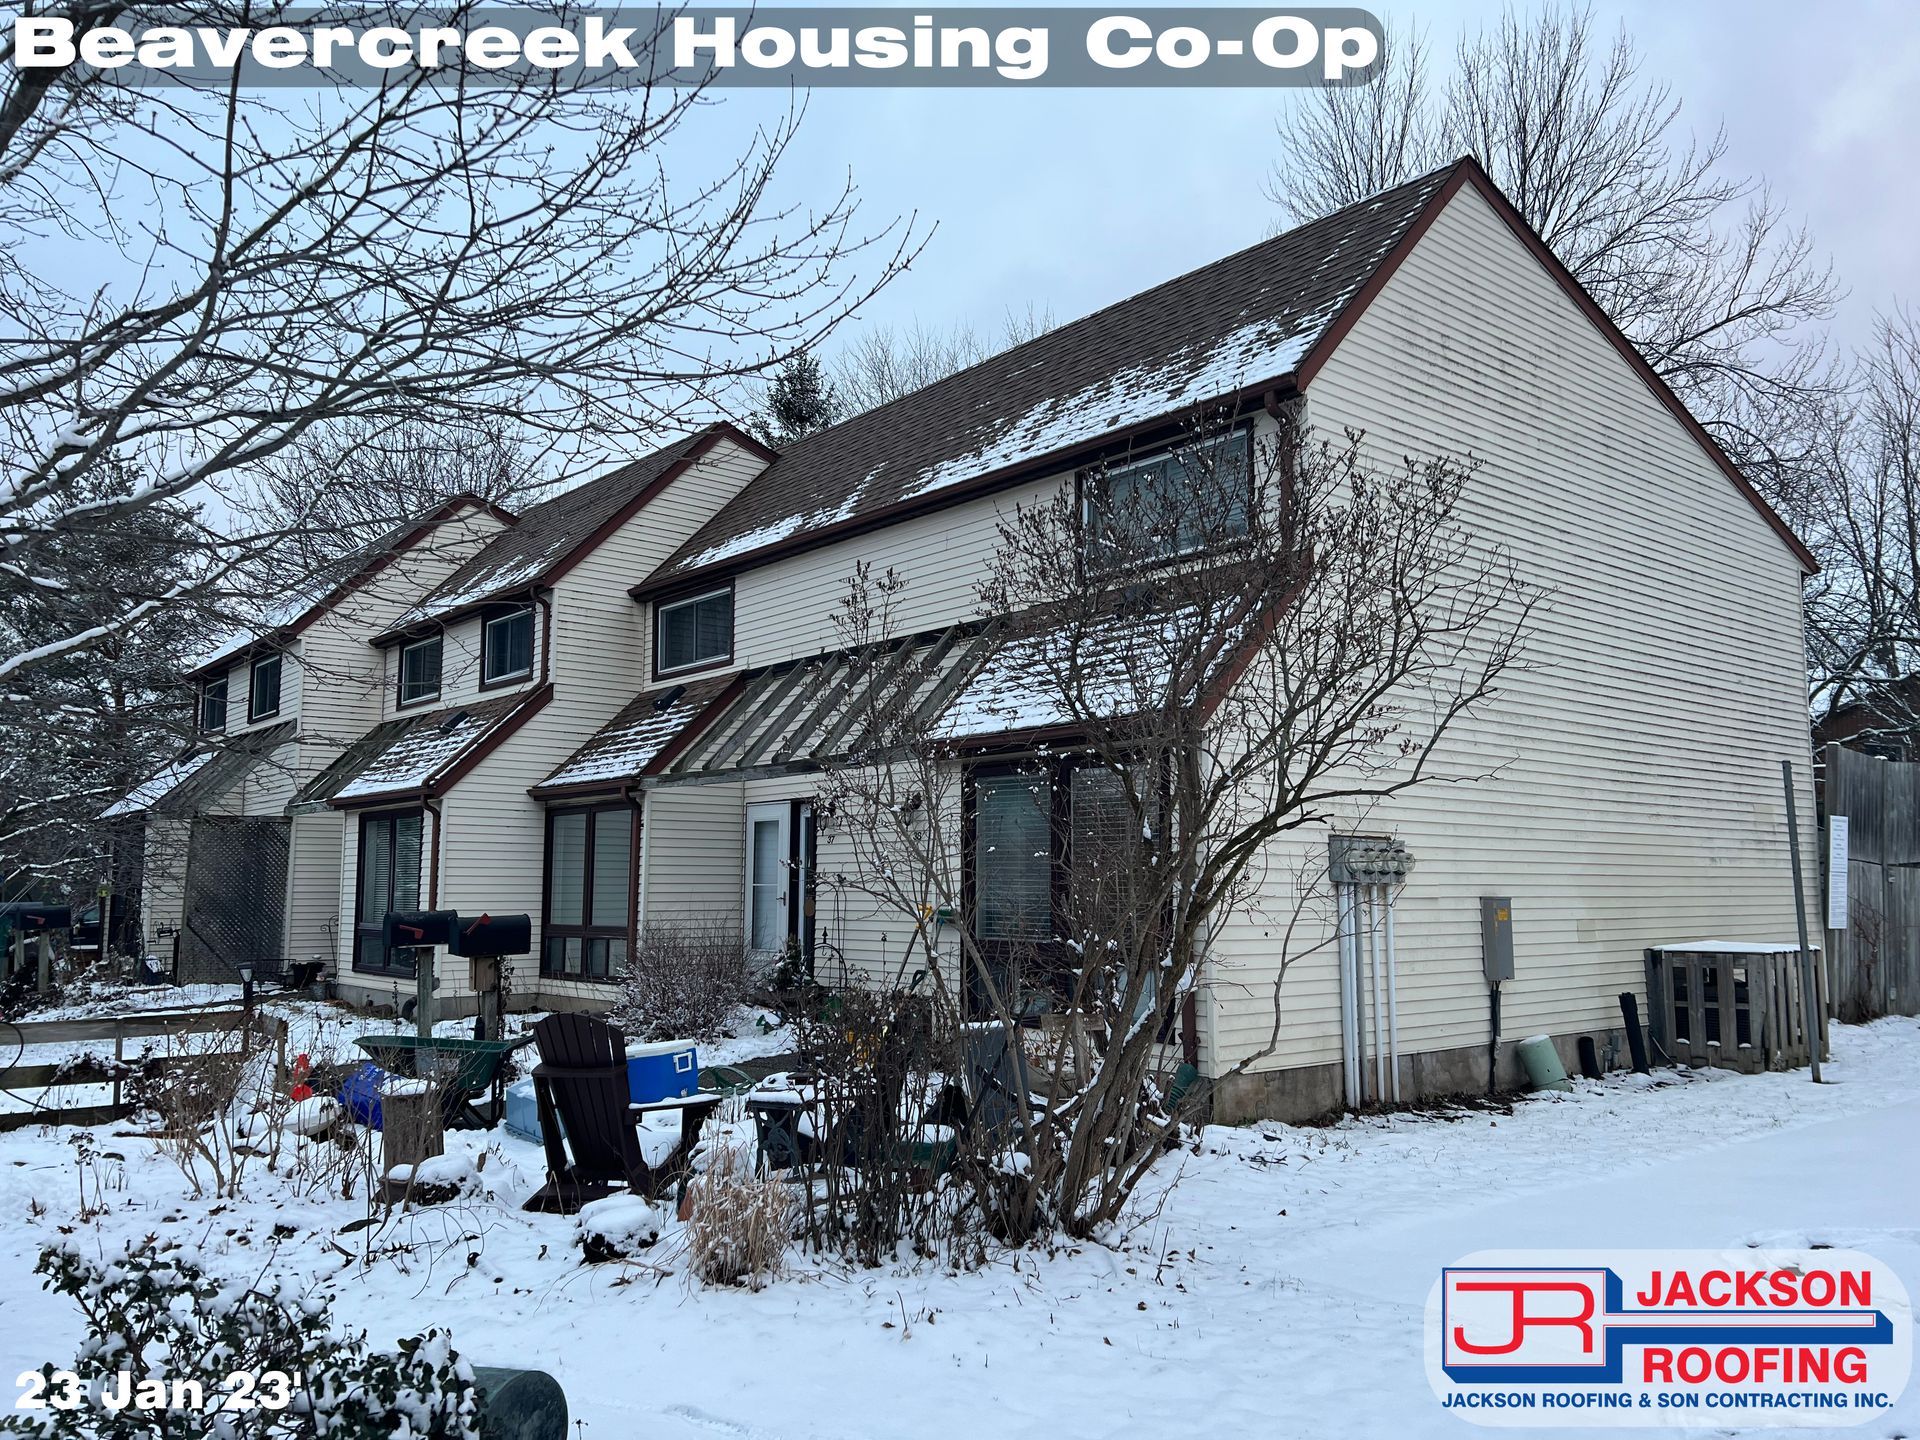 A beavercreek housing co-op with snow on the ground